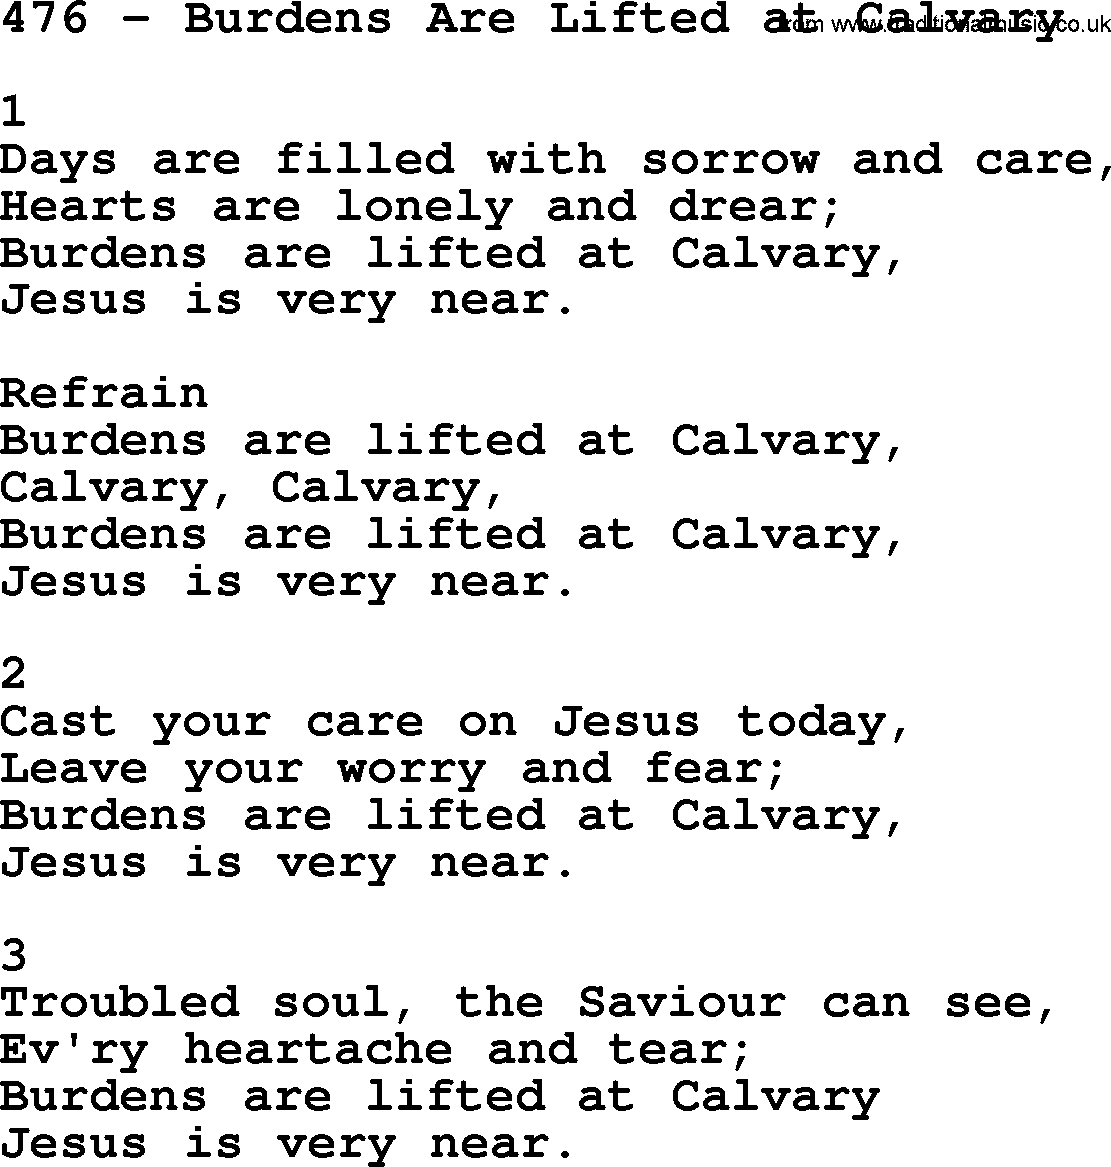 Complete Adventis Hymnal, title: 476-Burdens Are Lifted At Calvary, with lyrics, midi, mp3, powerpoints(PPT) and PDF,